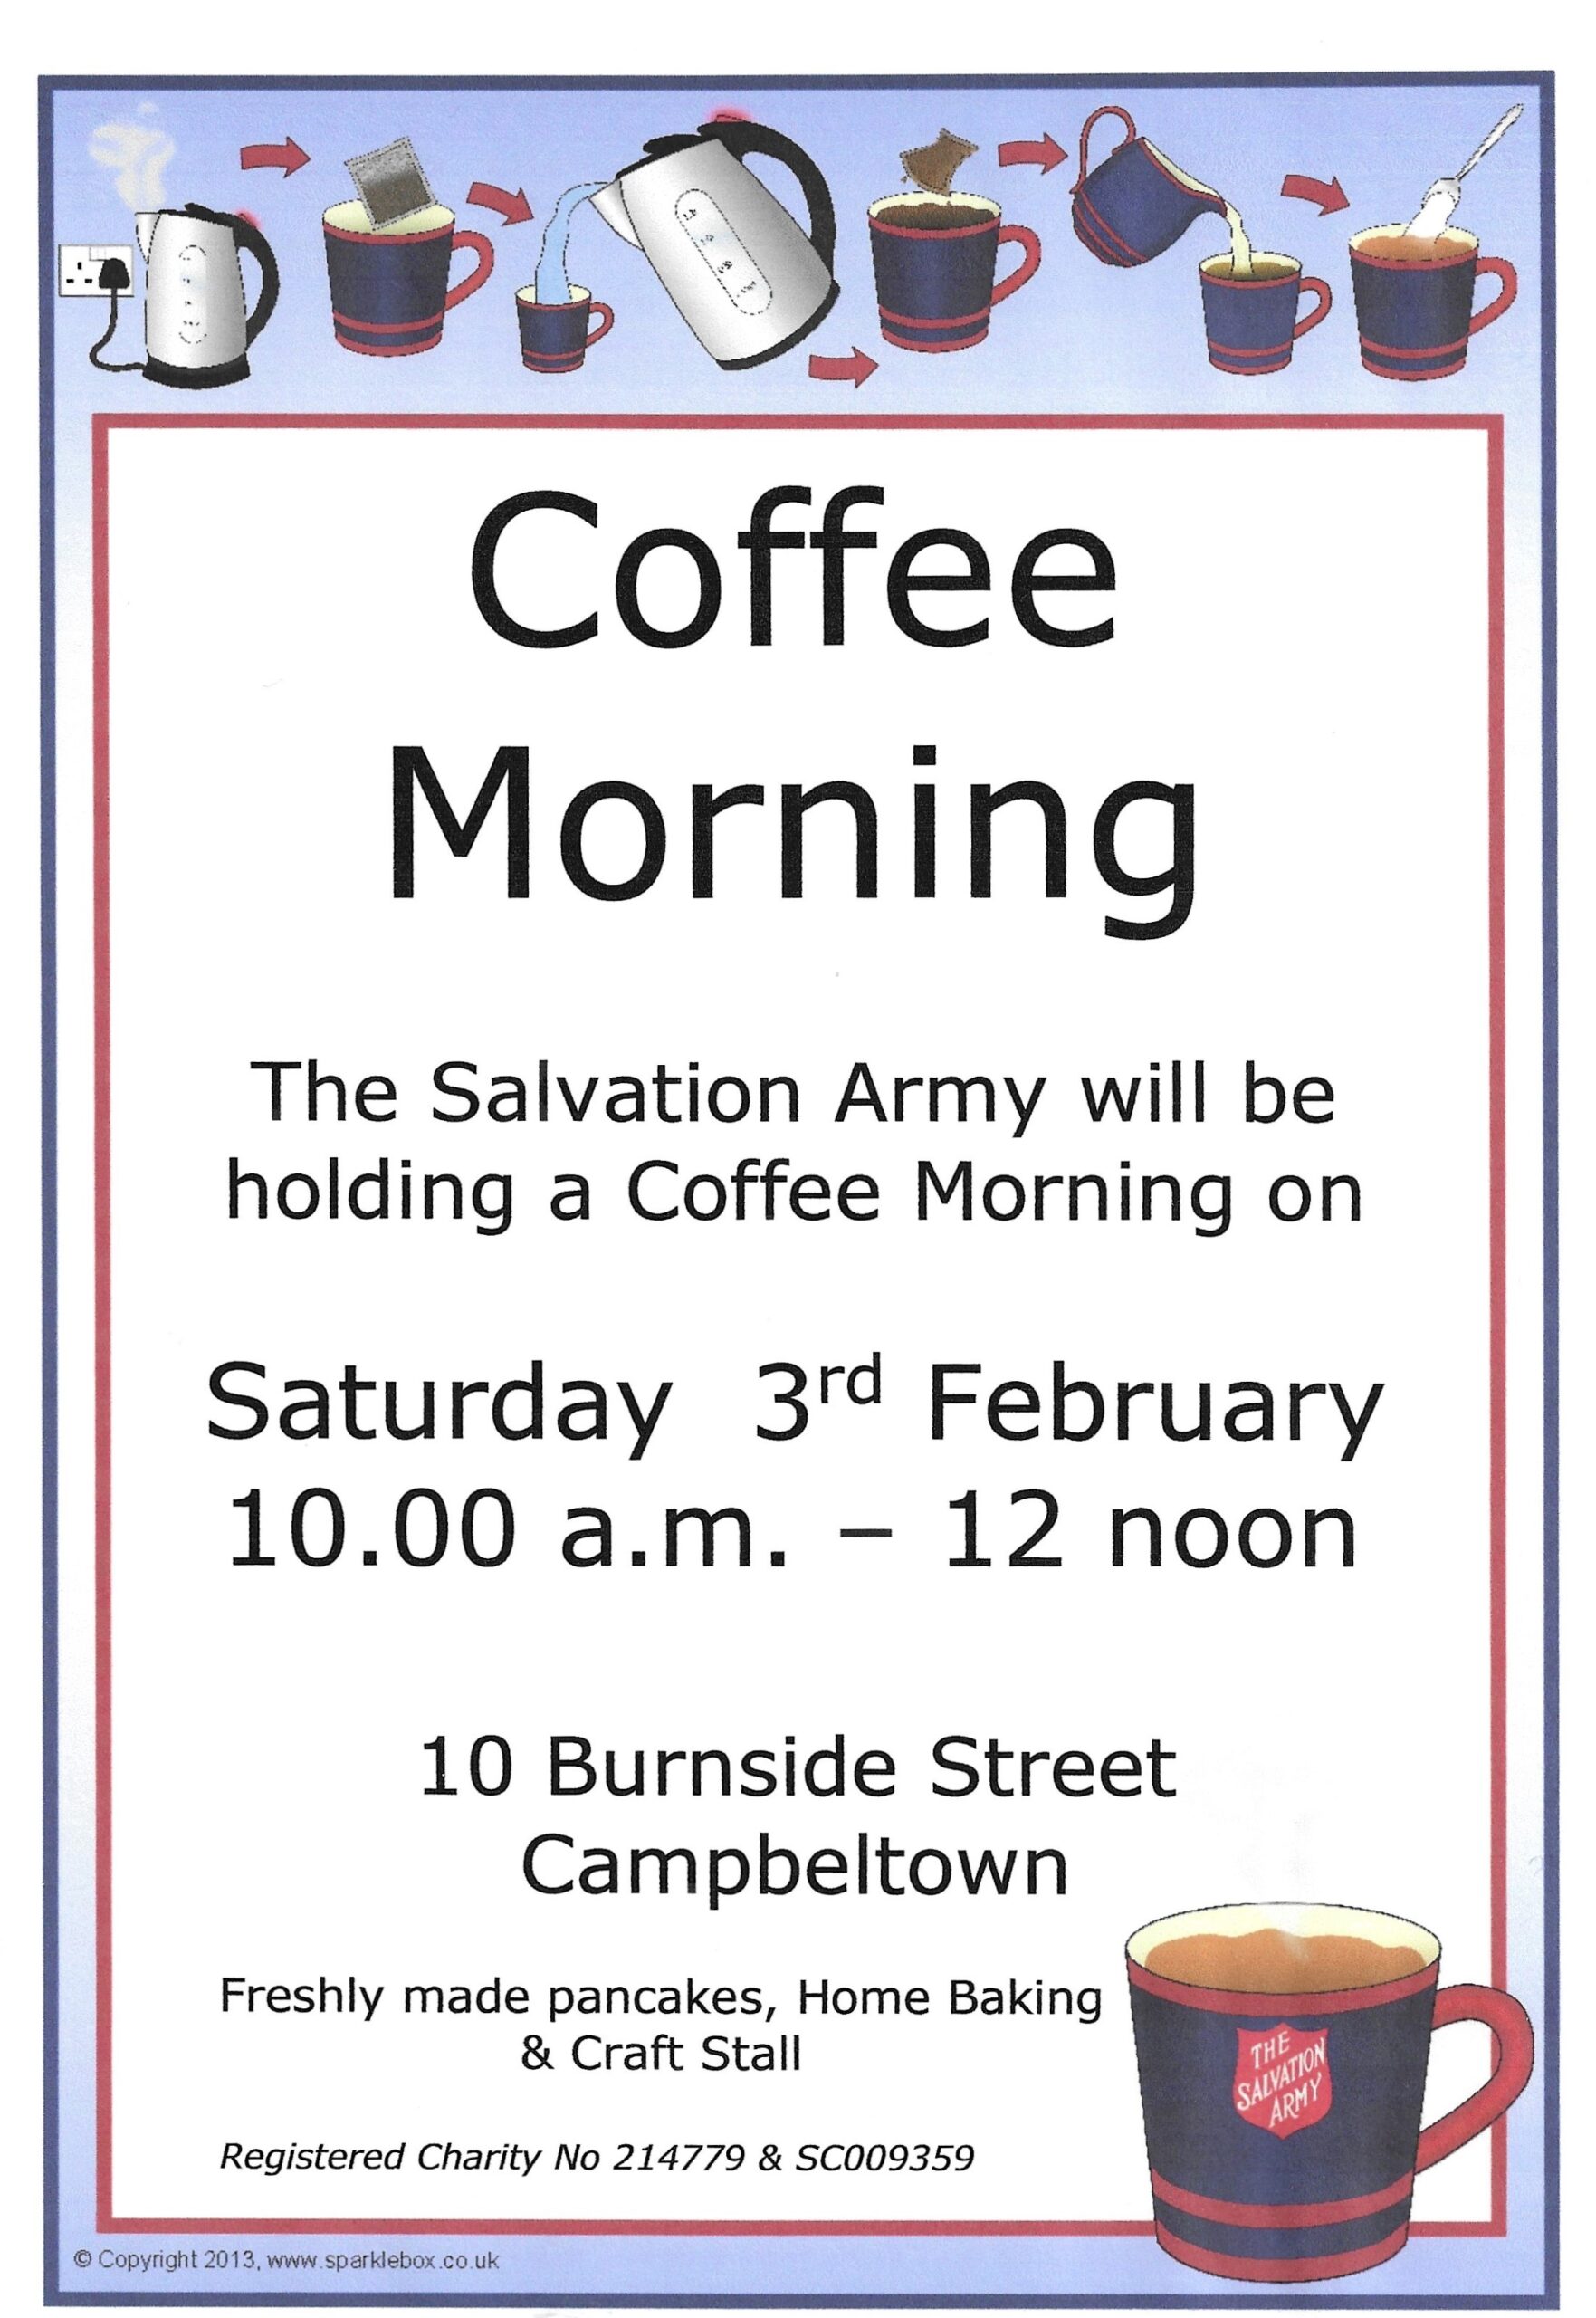 Coffee Morning - Campbeltown Salvation Army